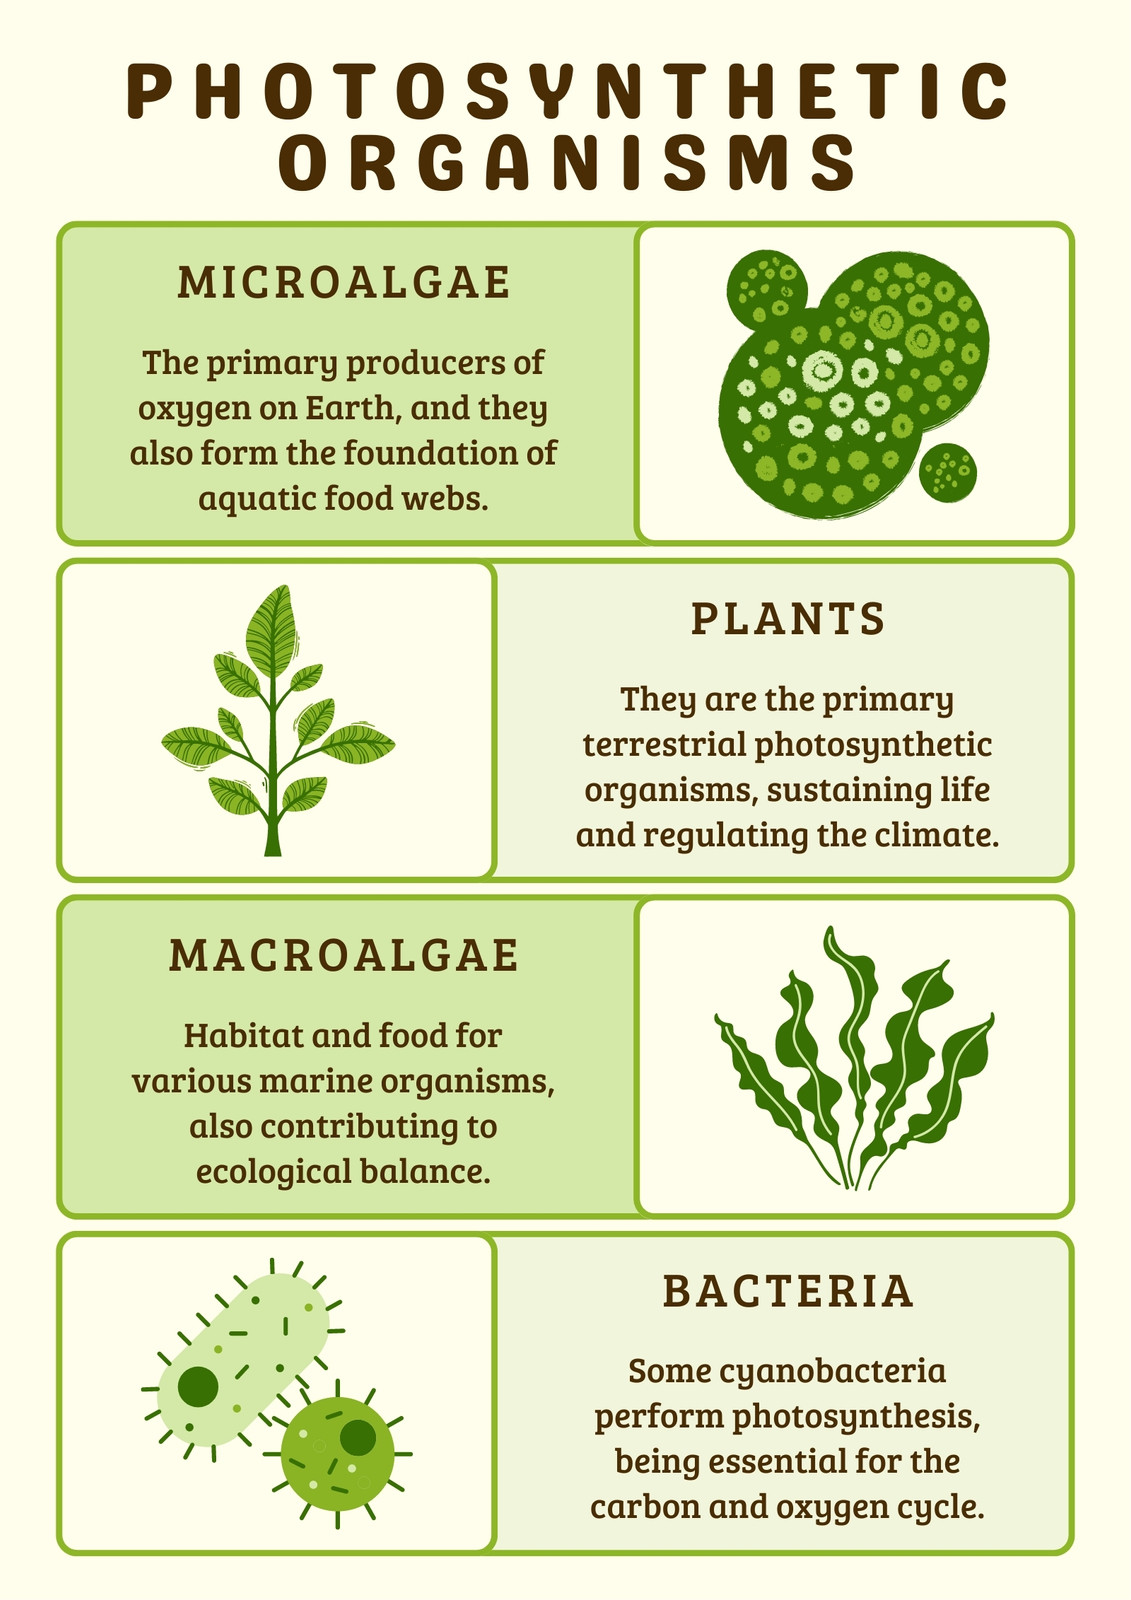 Green White Illustrative Biology photosynthetic organisms Poster